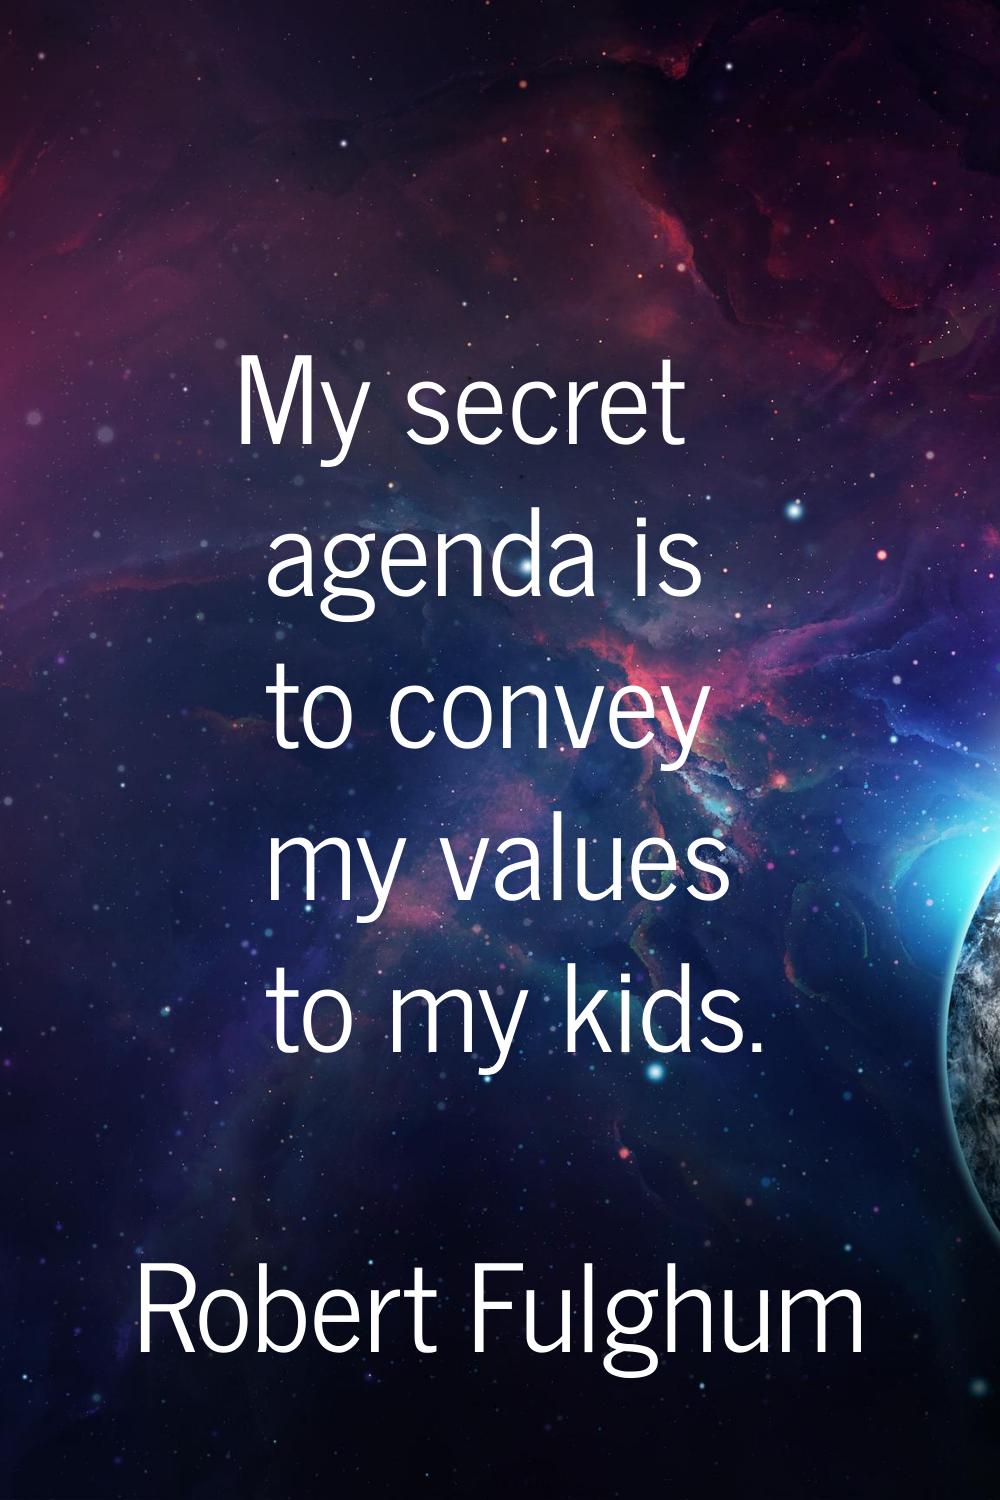 My secret agenda is to convey my values to my kids.